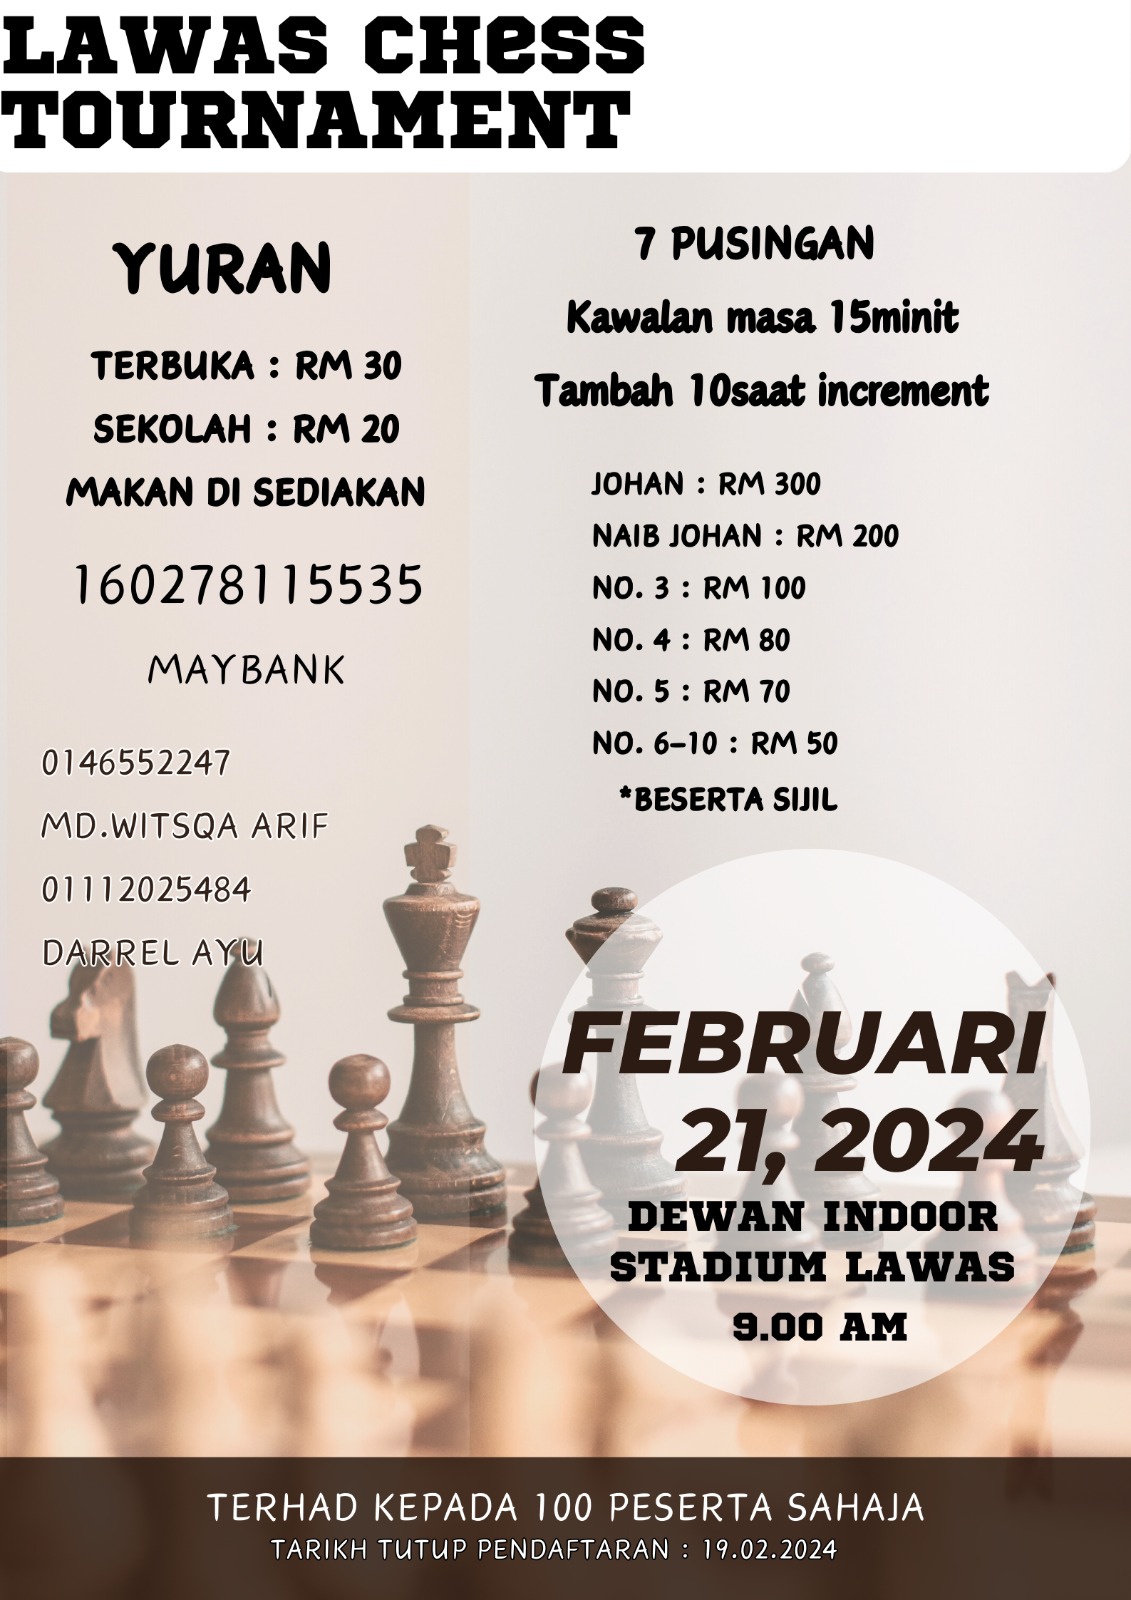 Lawas Chess Tournament